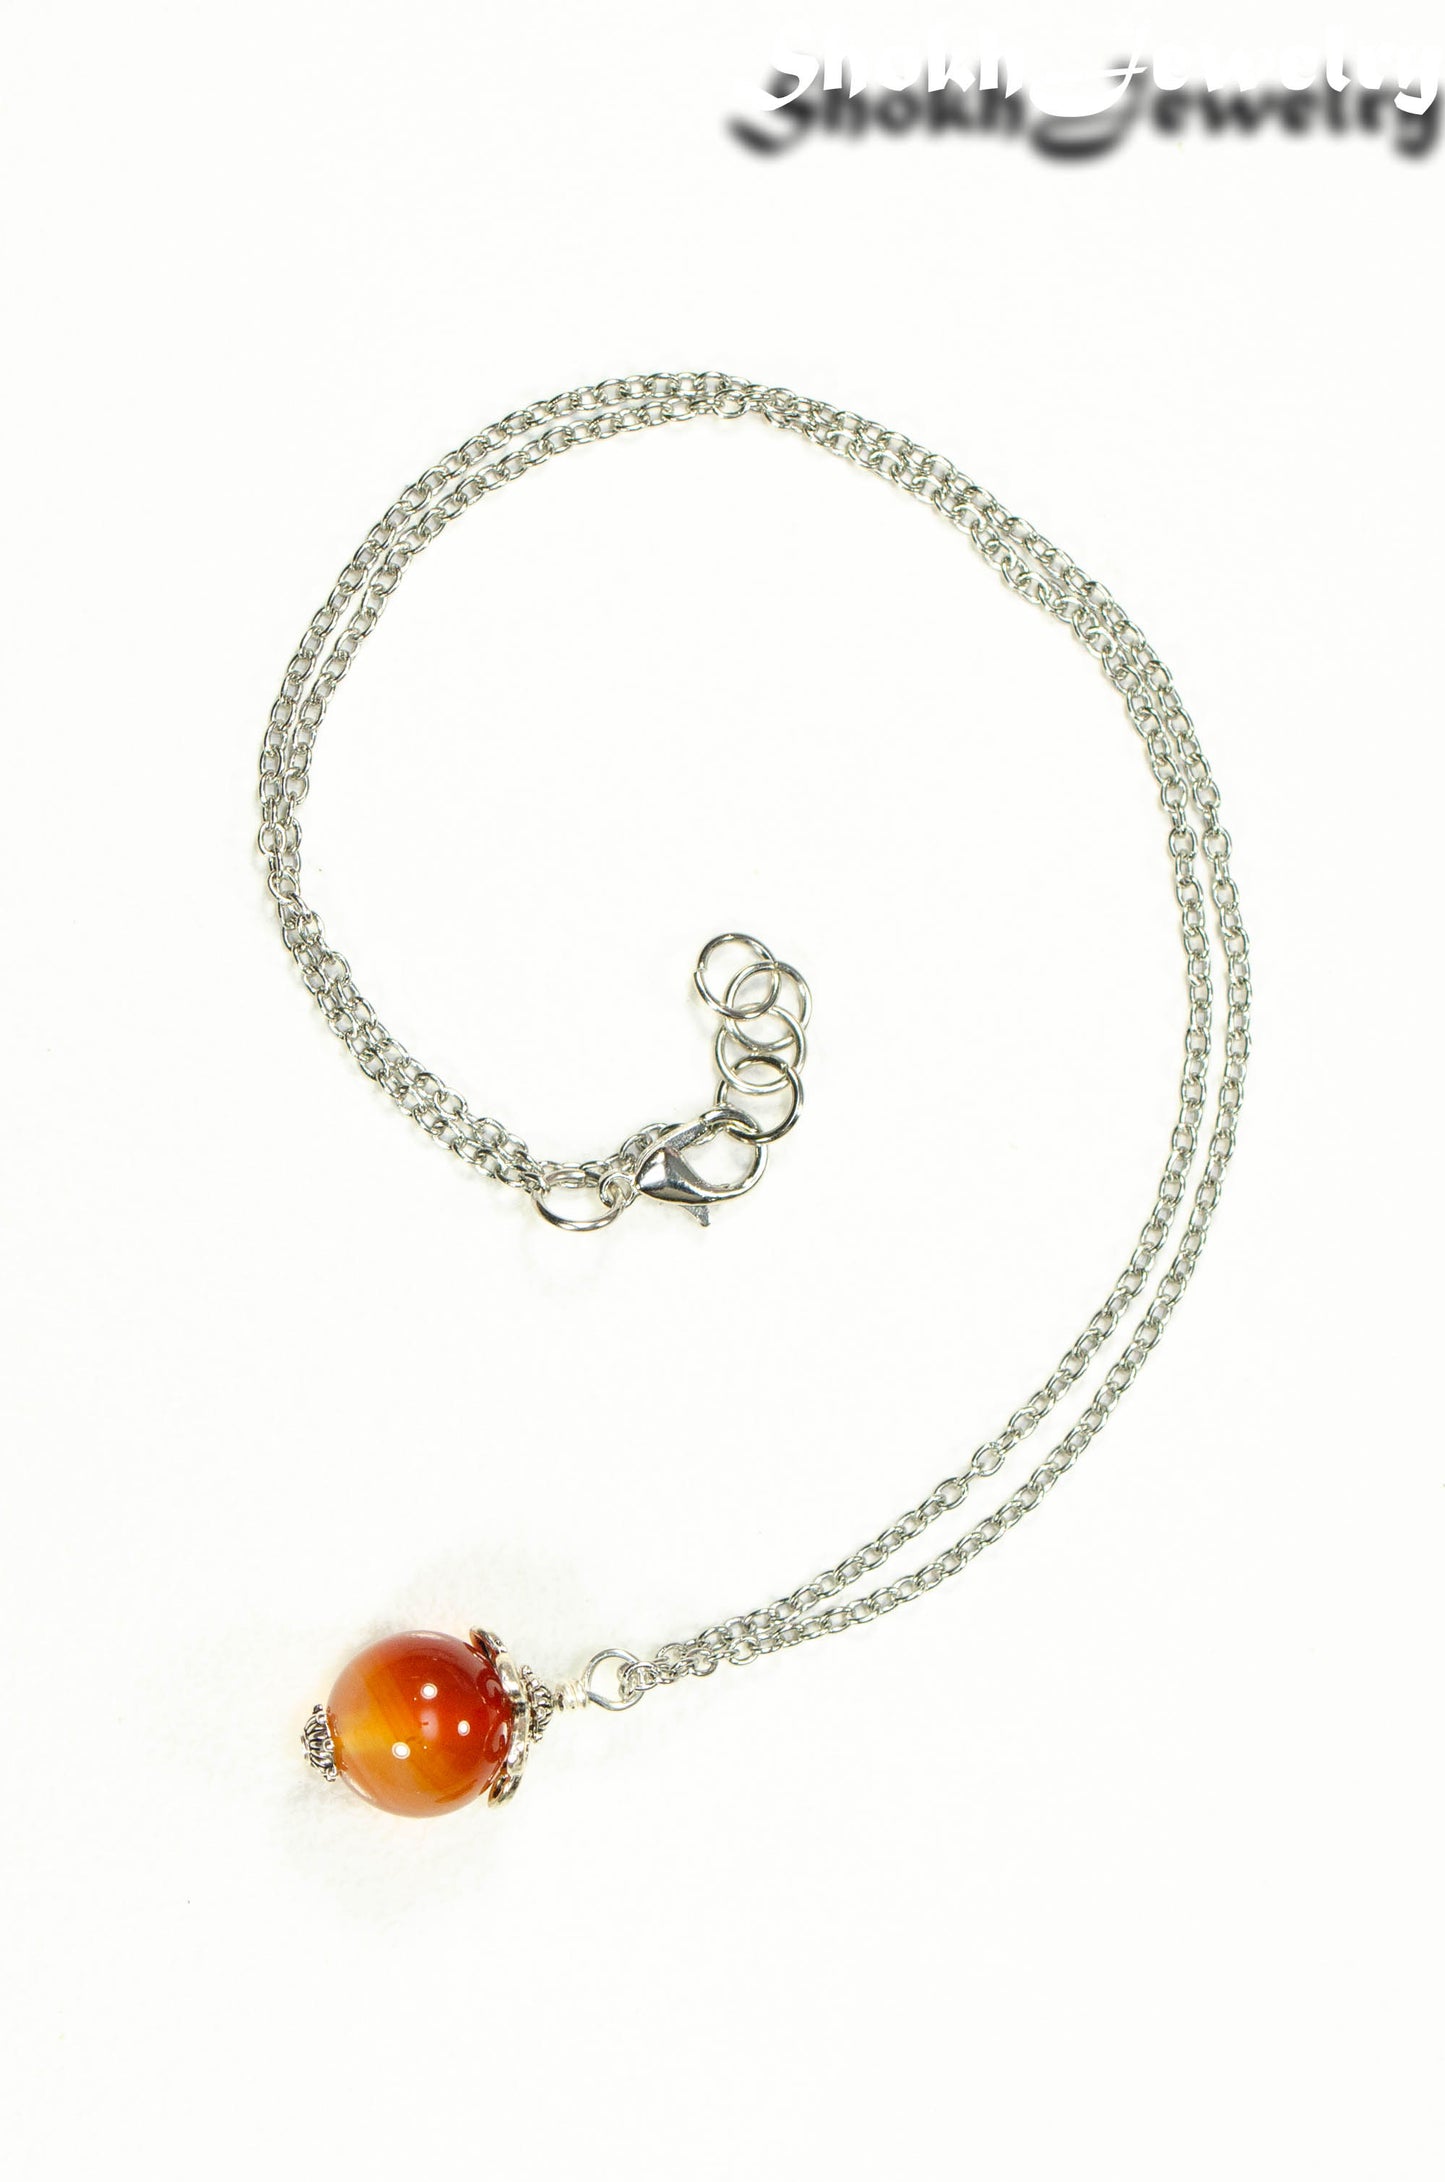 Top view of 12mm Carnelian Pendant Necklace.